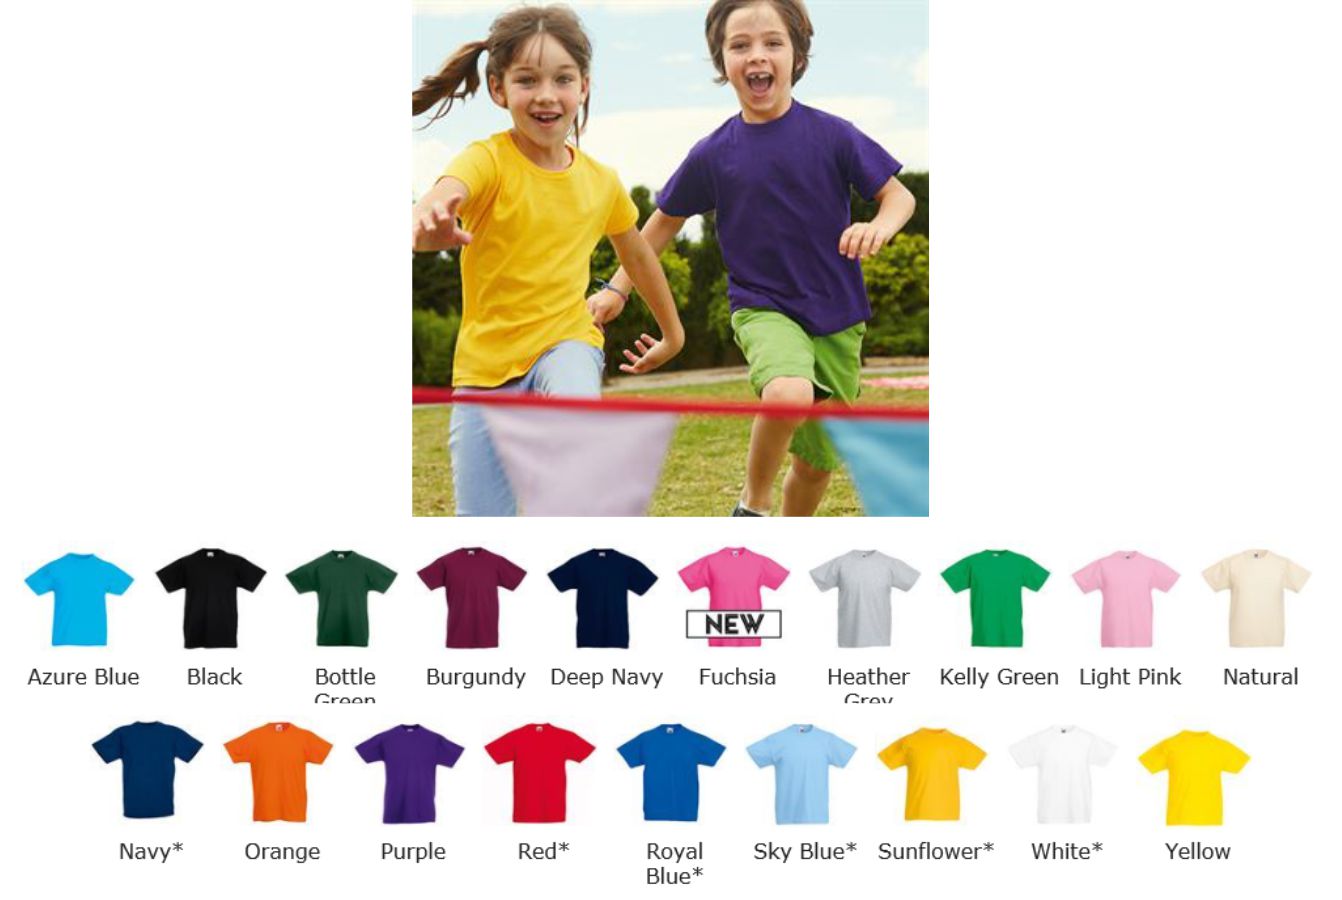 Fruit of the loom SS28B Childs Value Weight tee shirt